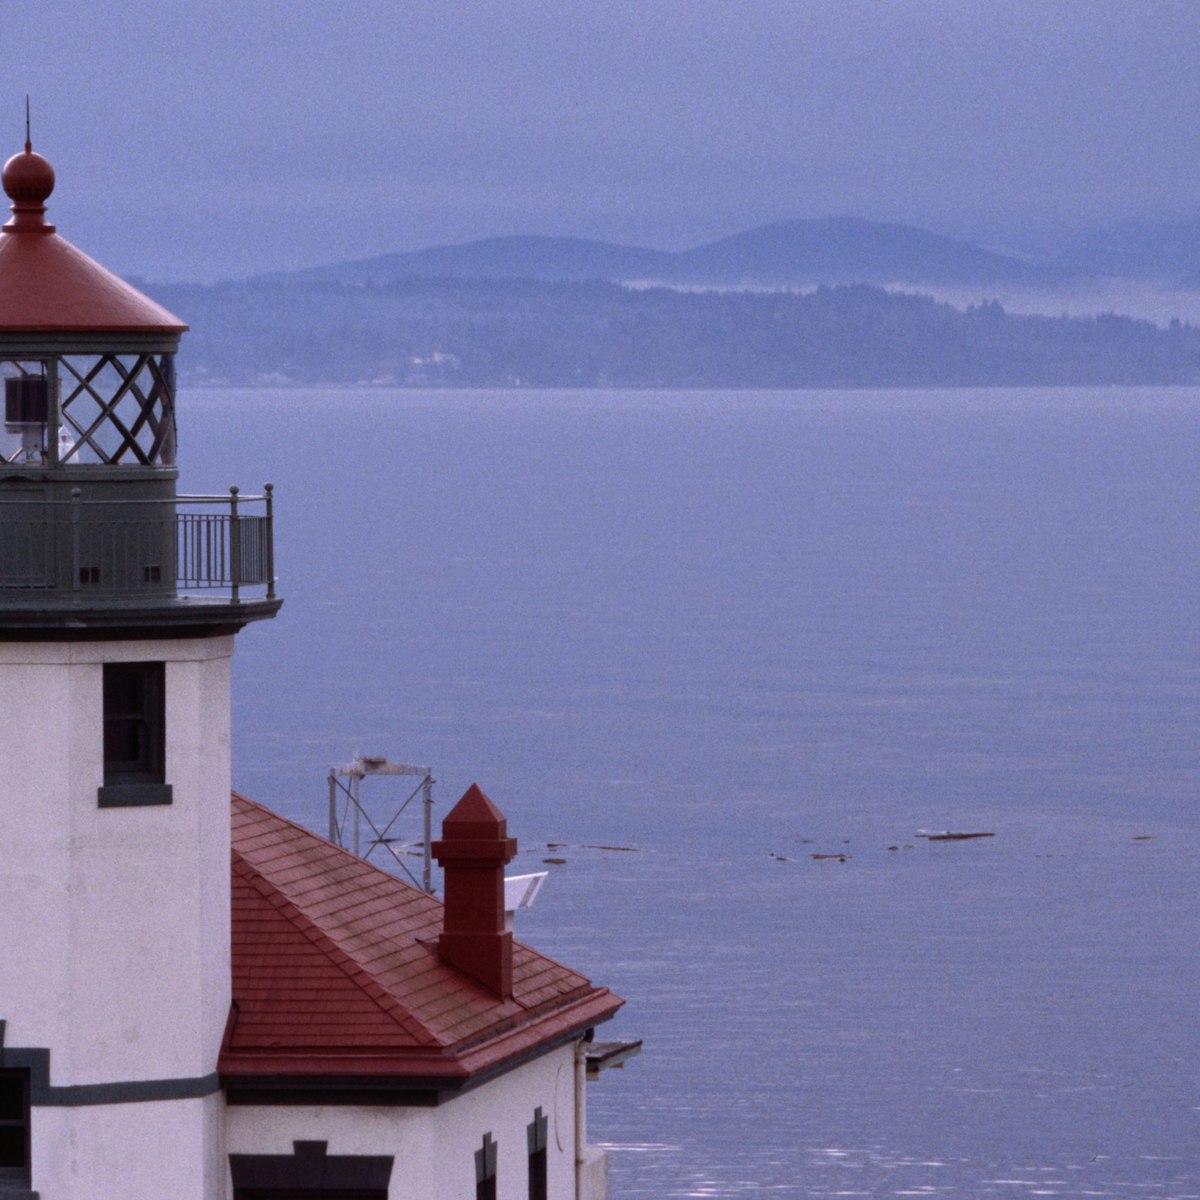 Alki Point Light Station on Alki Beach, the southern entrance to Seattle's harbour.